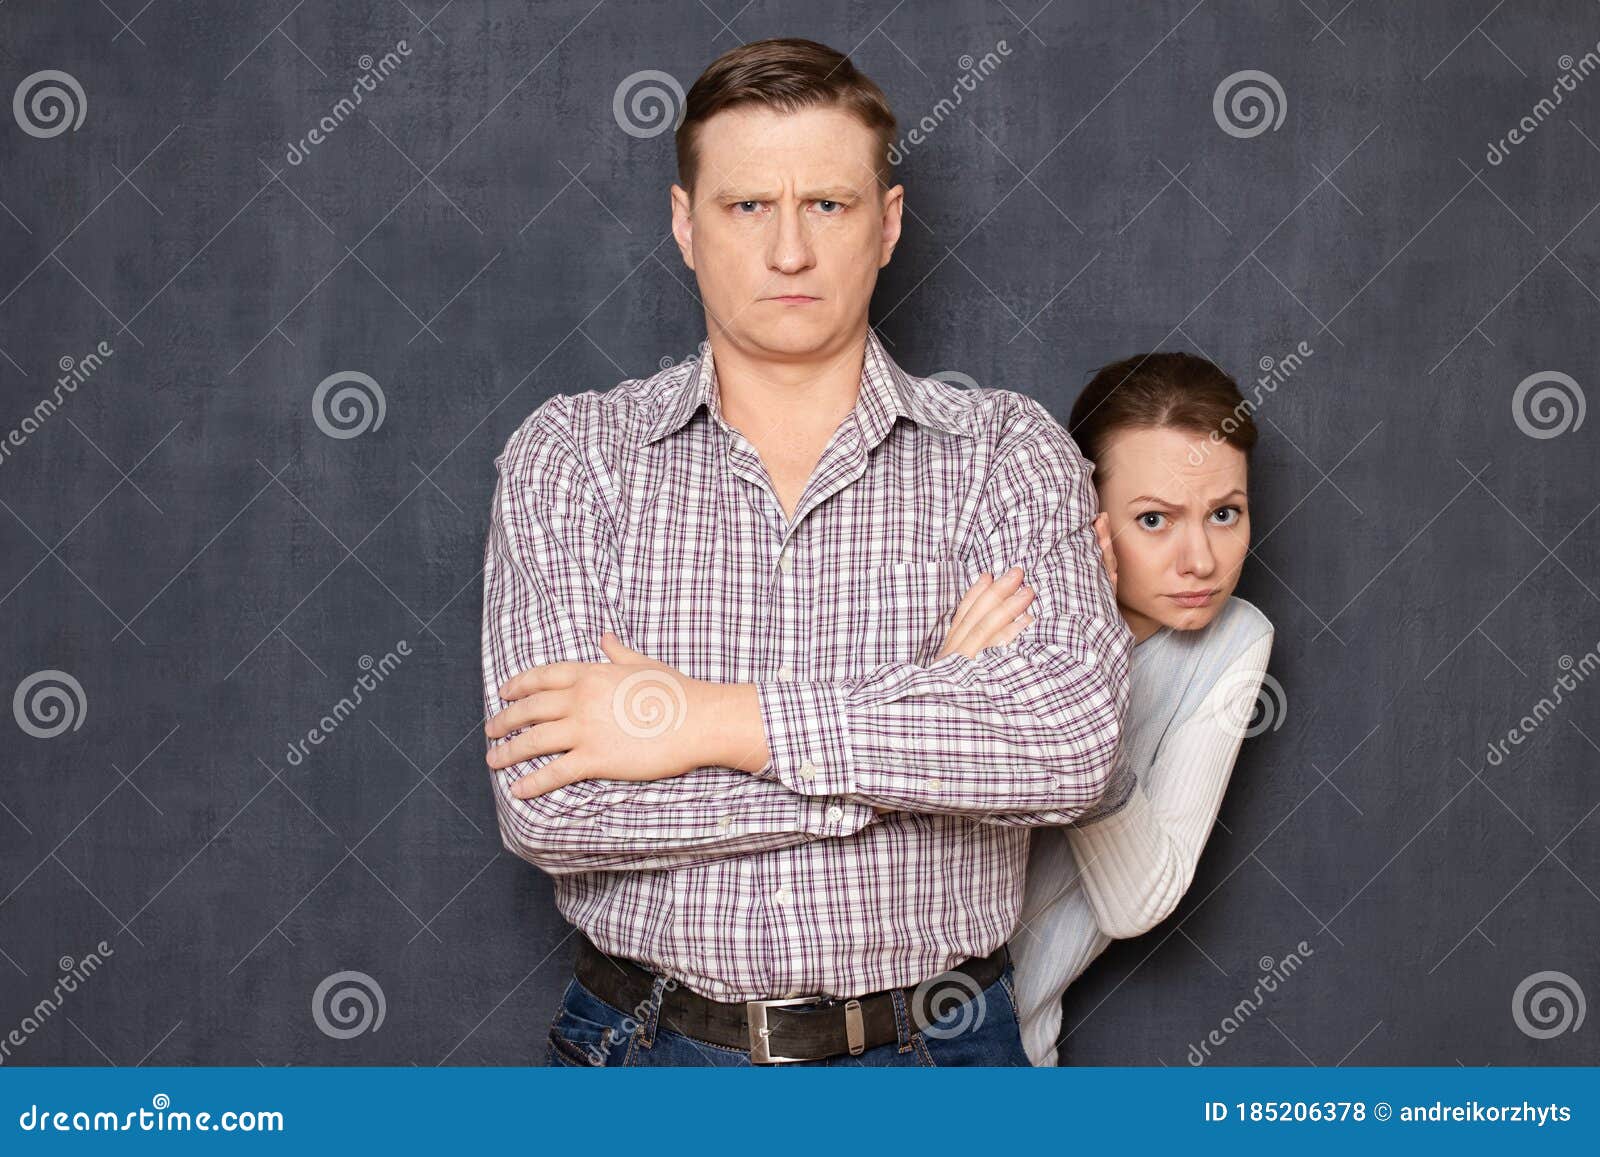 335 Tall Woman Short Man Stock Photos - Free & Royalty-Free Stock Photos  from Dreamstime